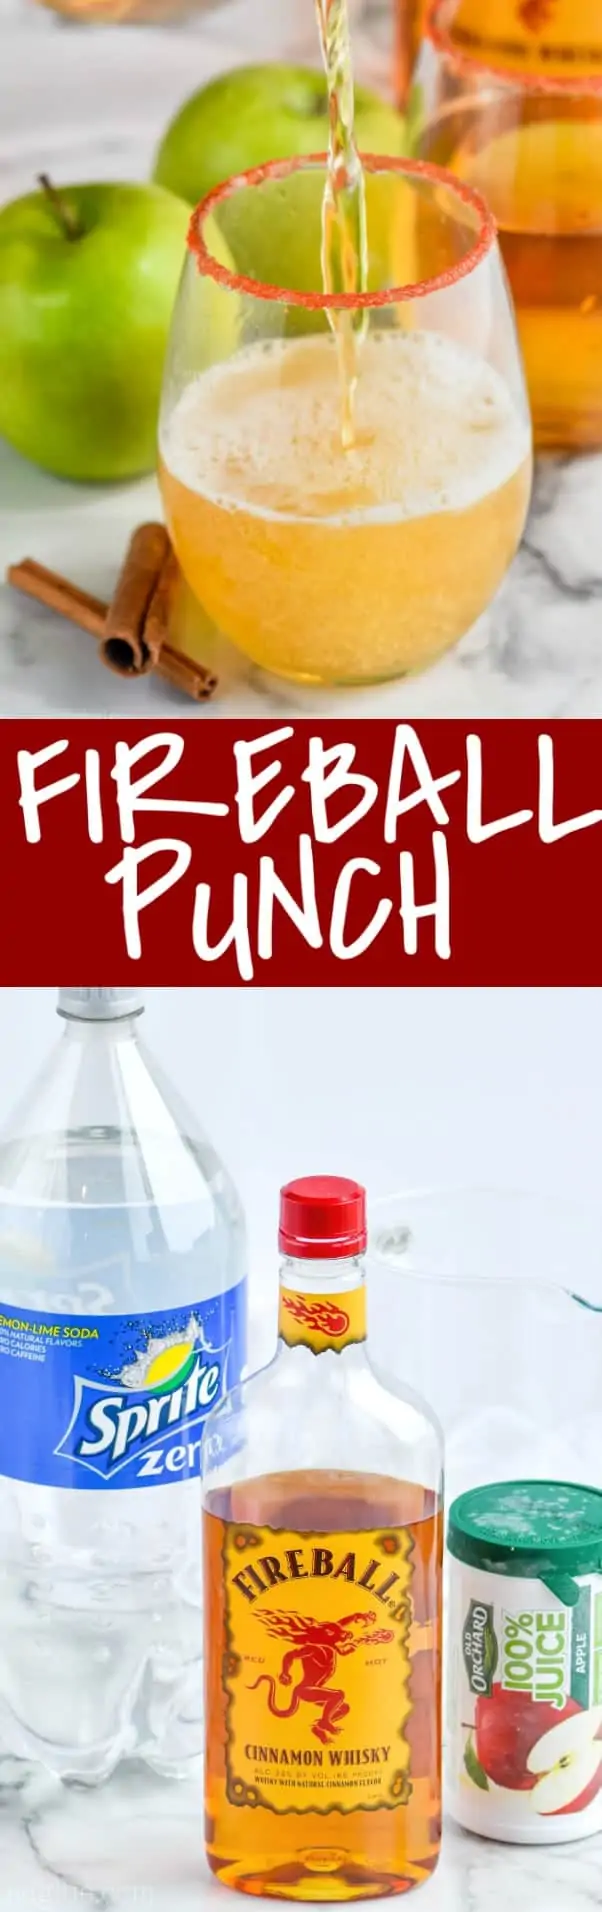 fireball punch being poured into a glass